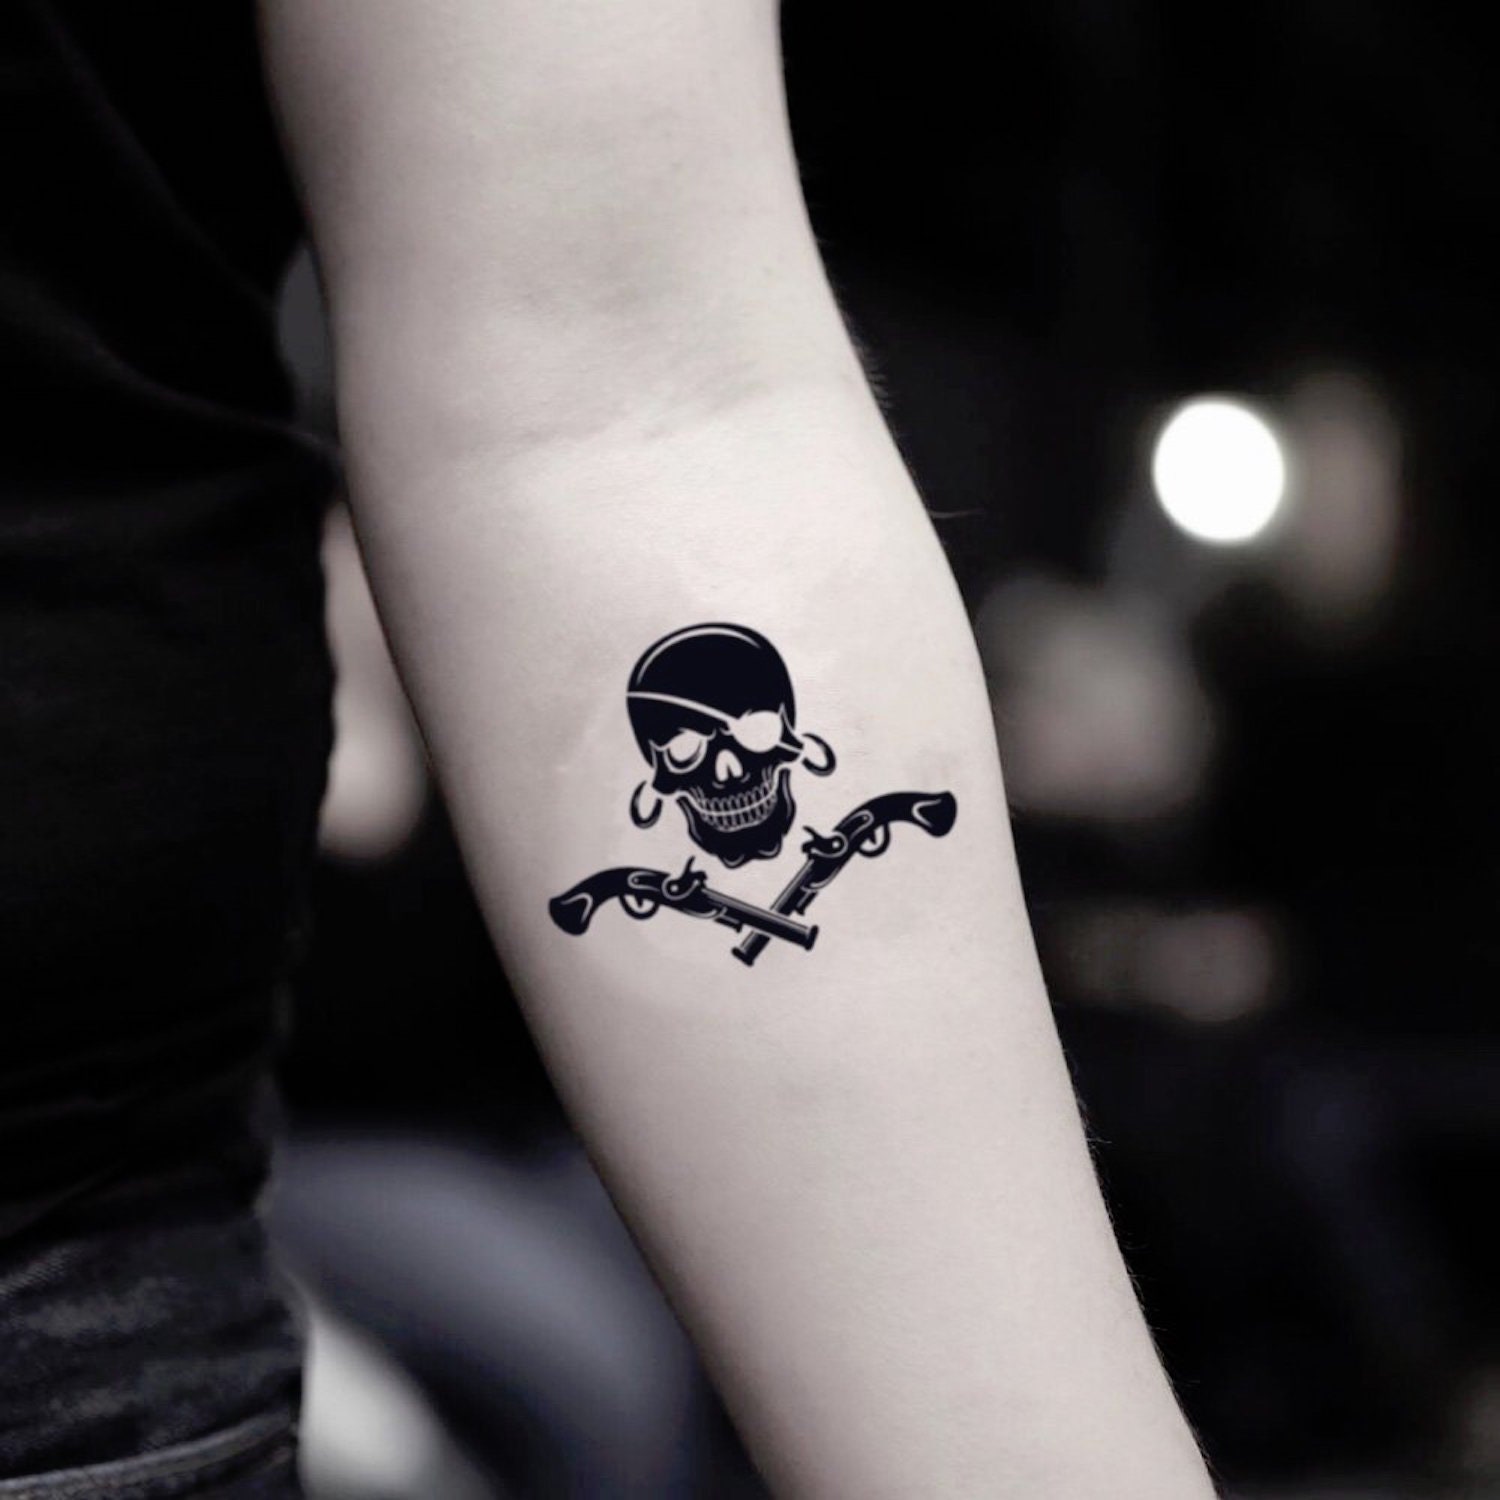 Colored american flag punisher skull tattoo on upper arm